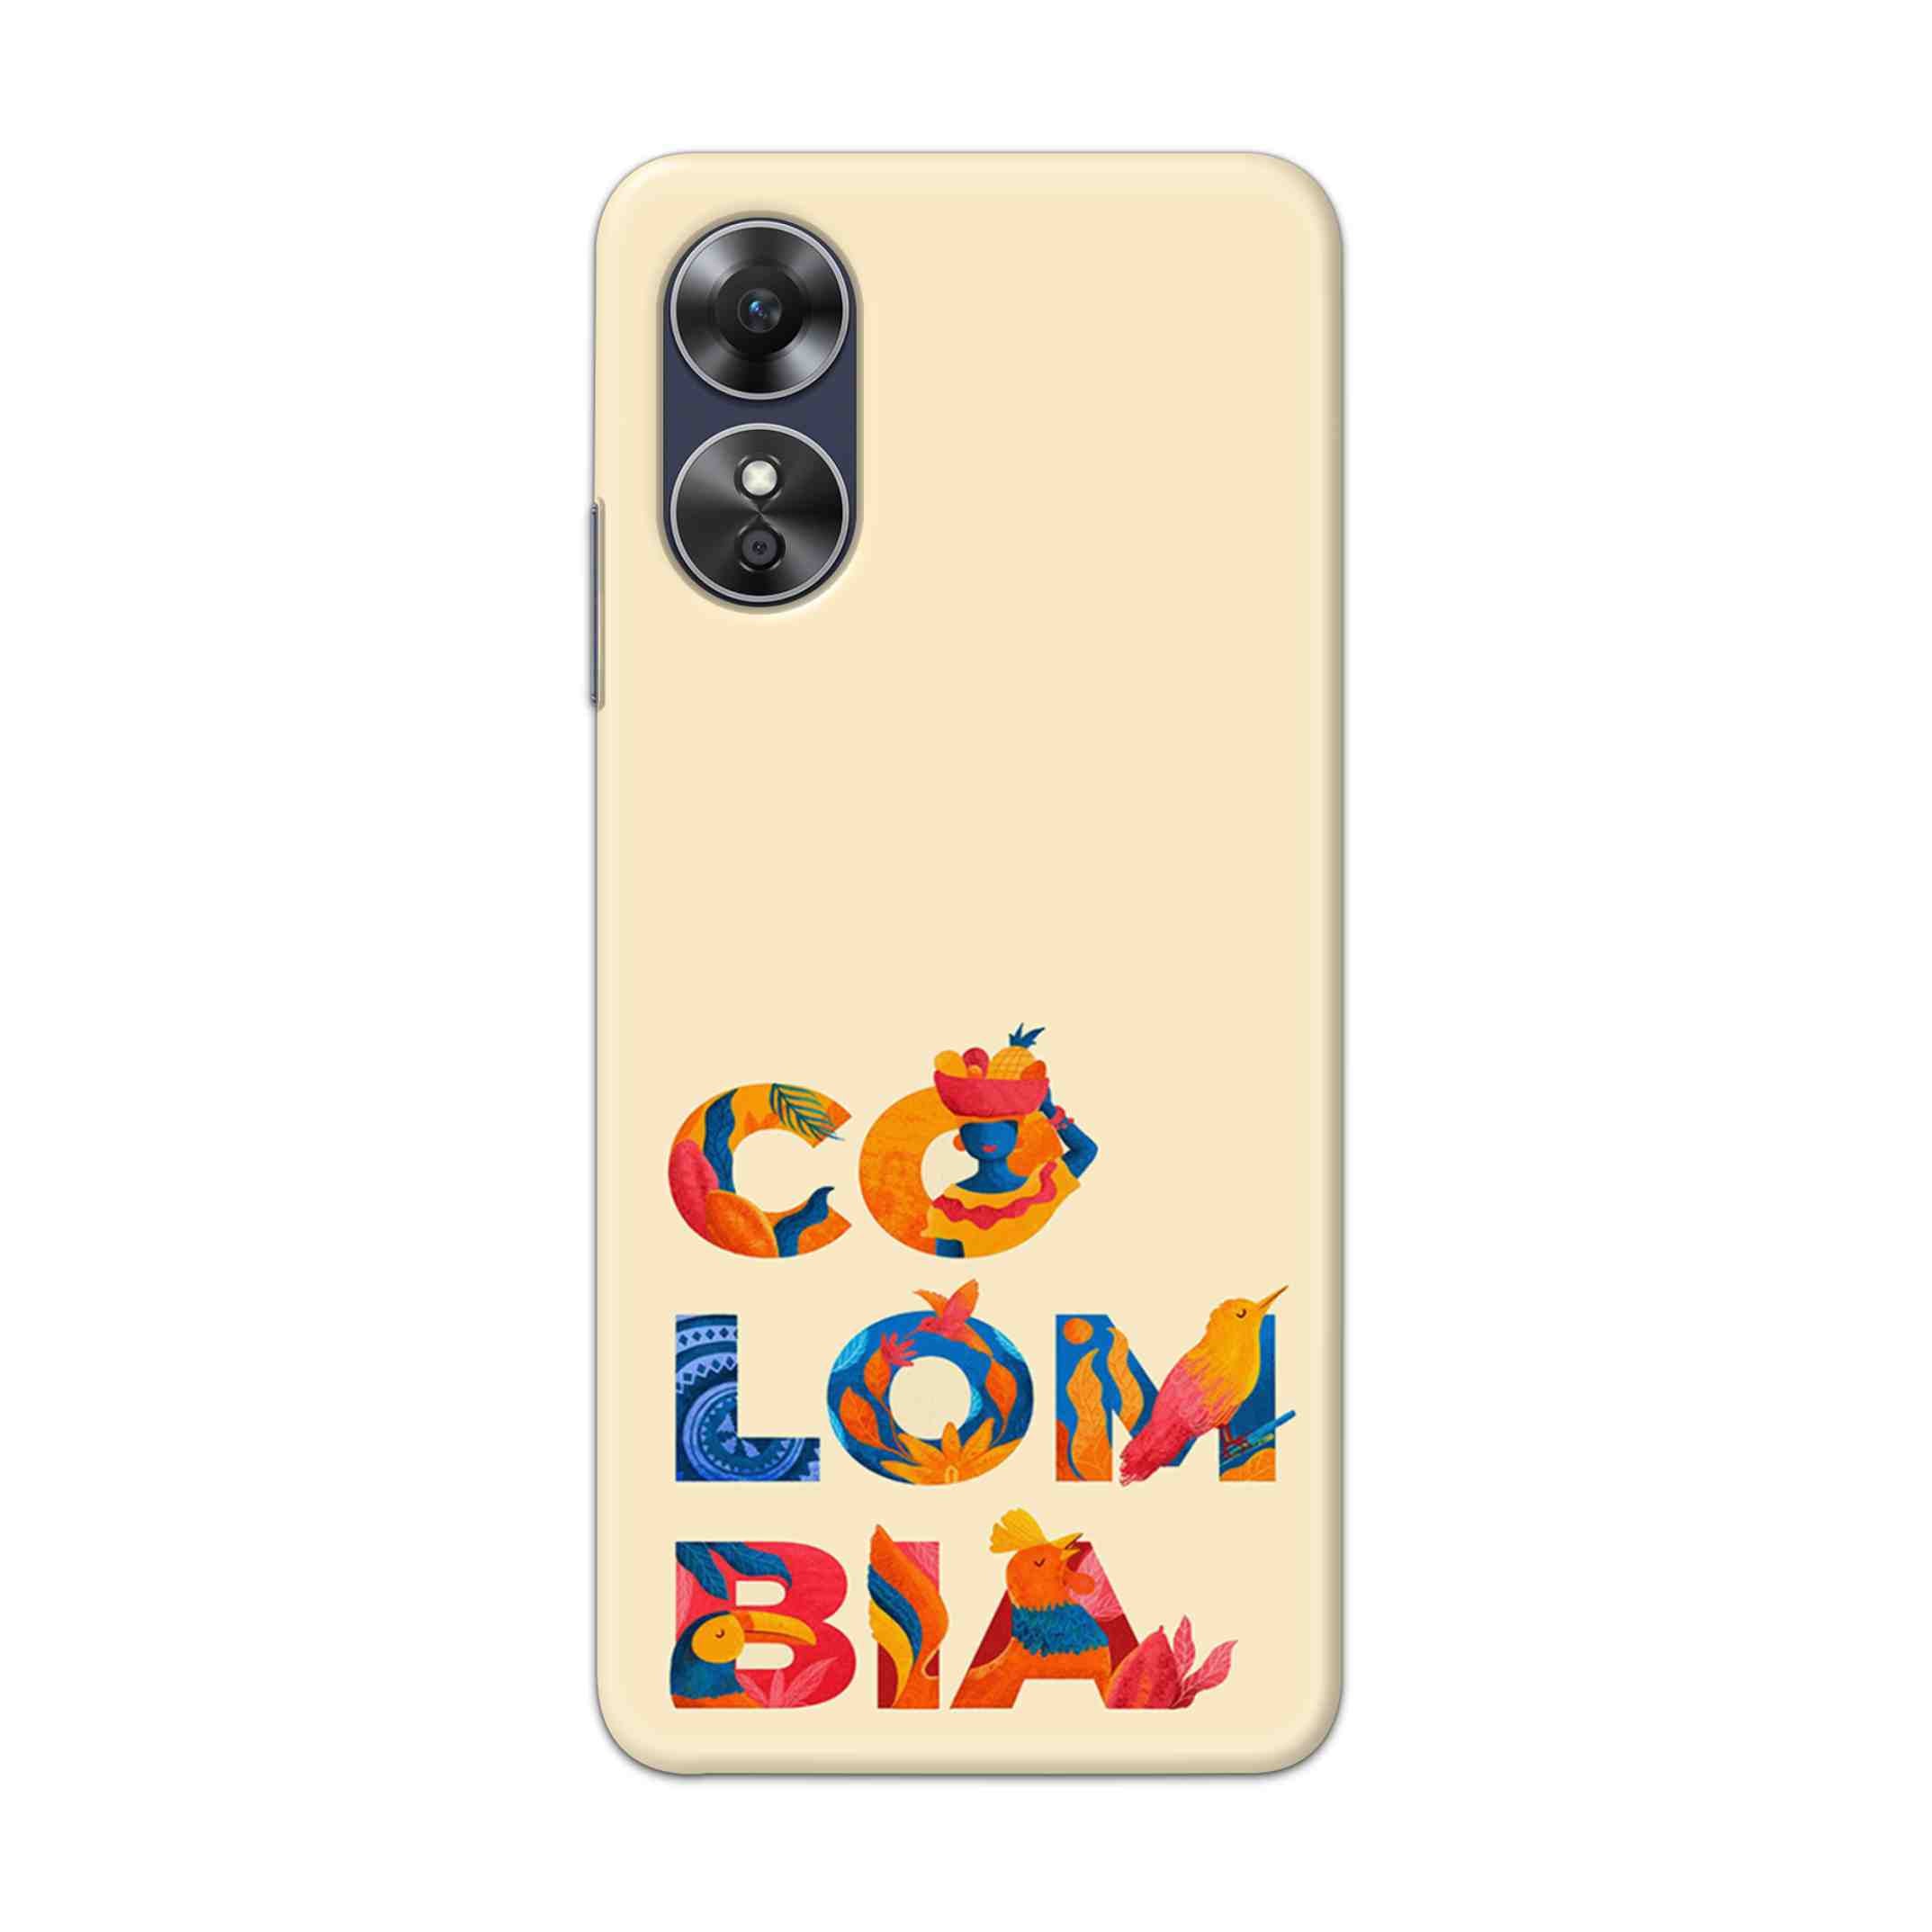 Buy Colombia Hard Back Mobile Phone Case Cover For Oppo A17 Online